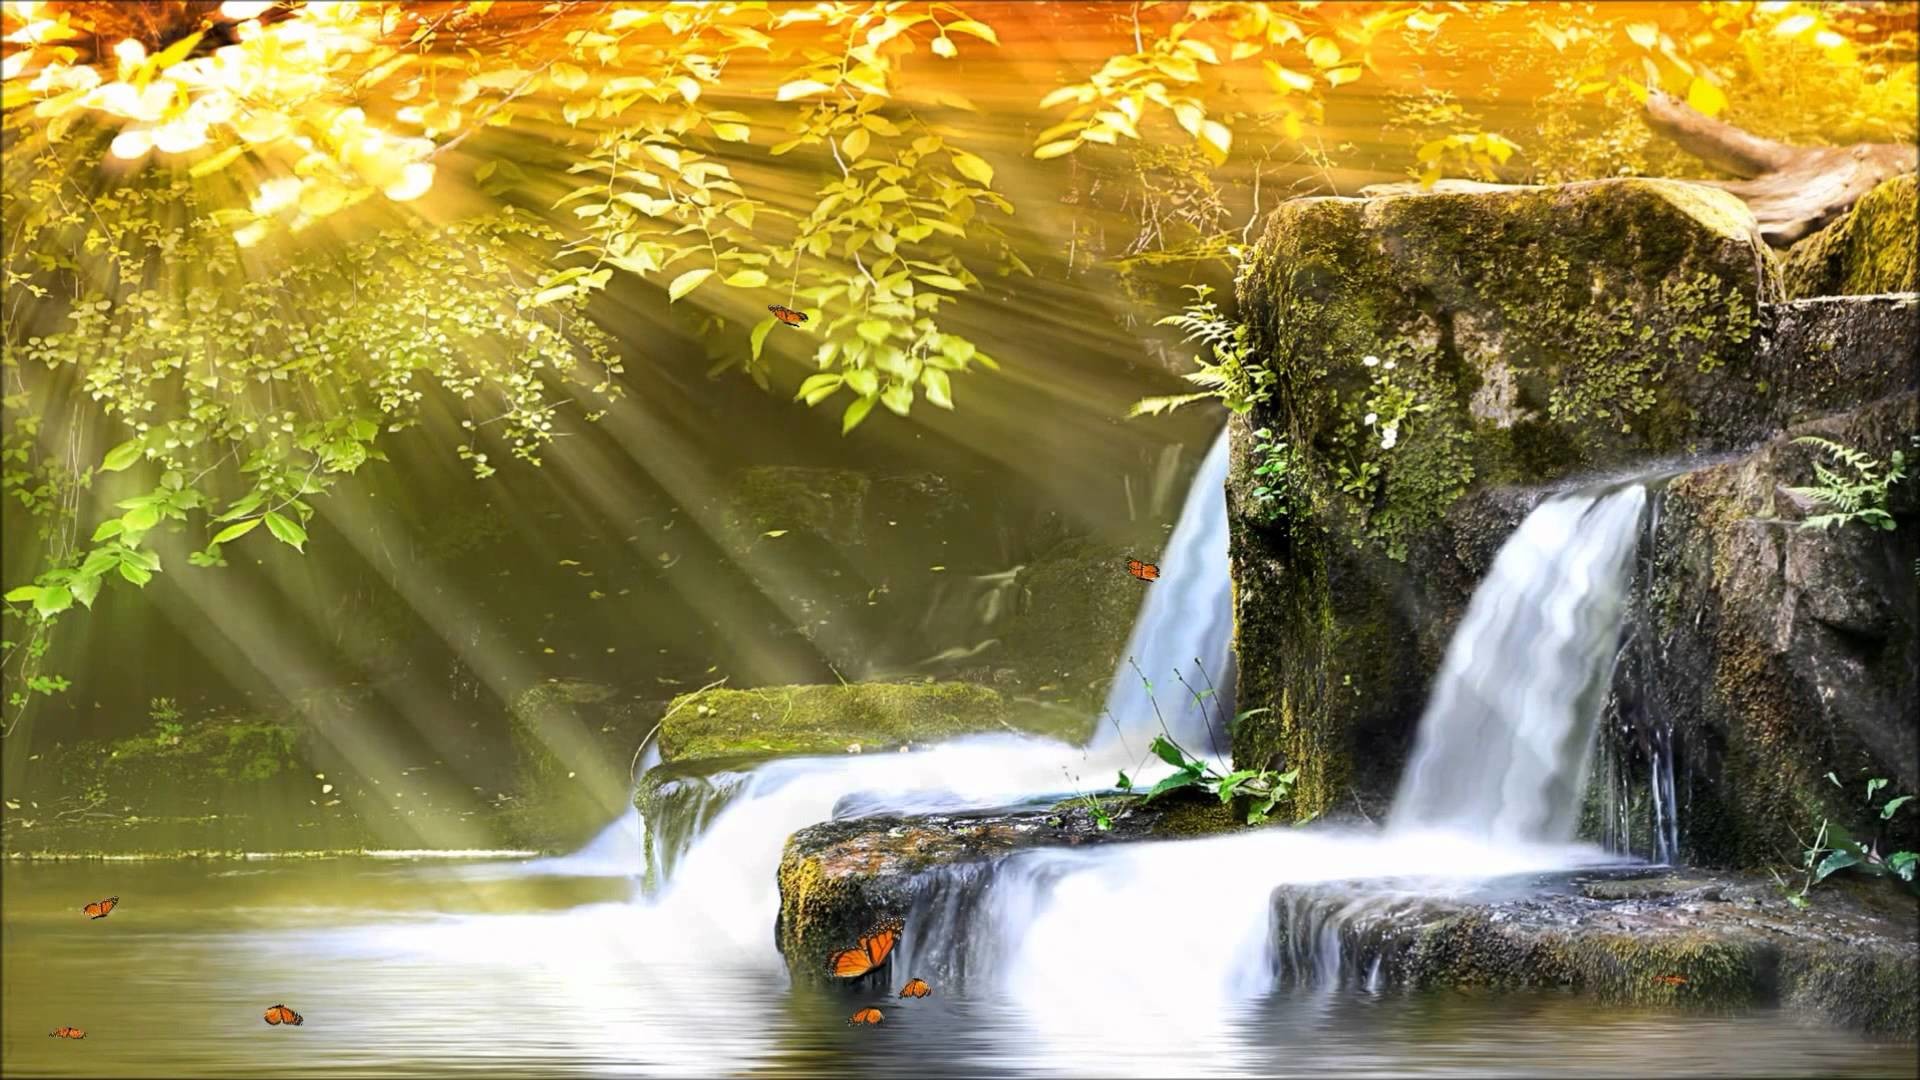 Animated Waterfall Wallpaper with Sound (46+ images)